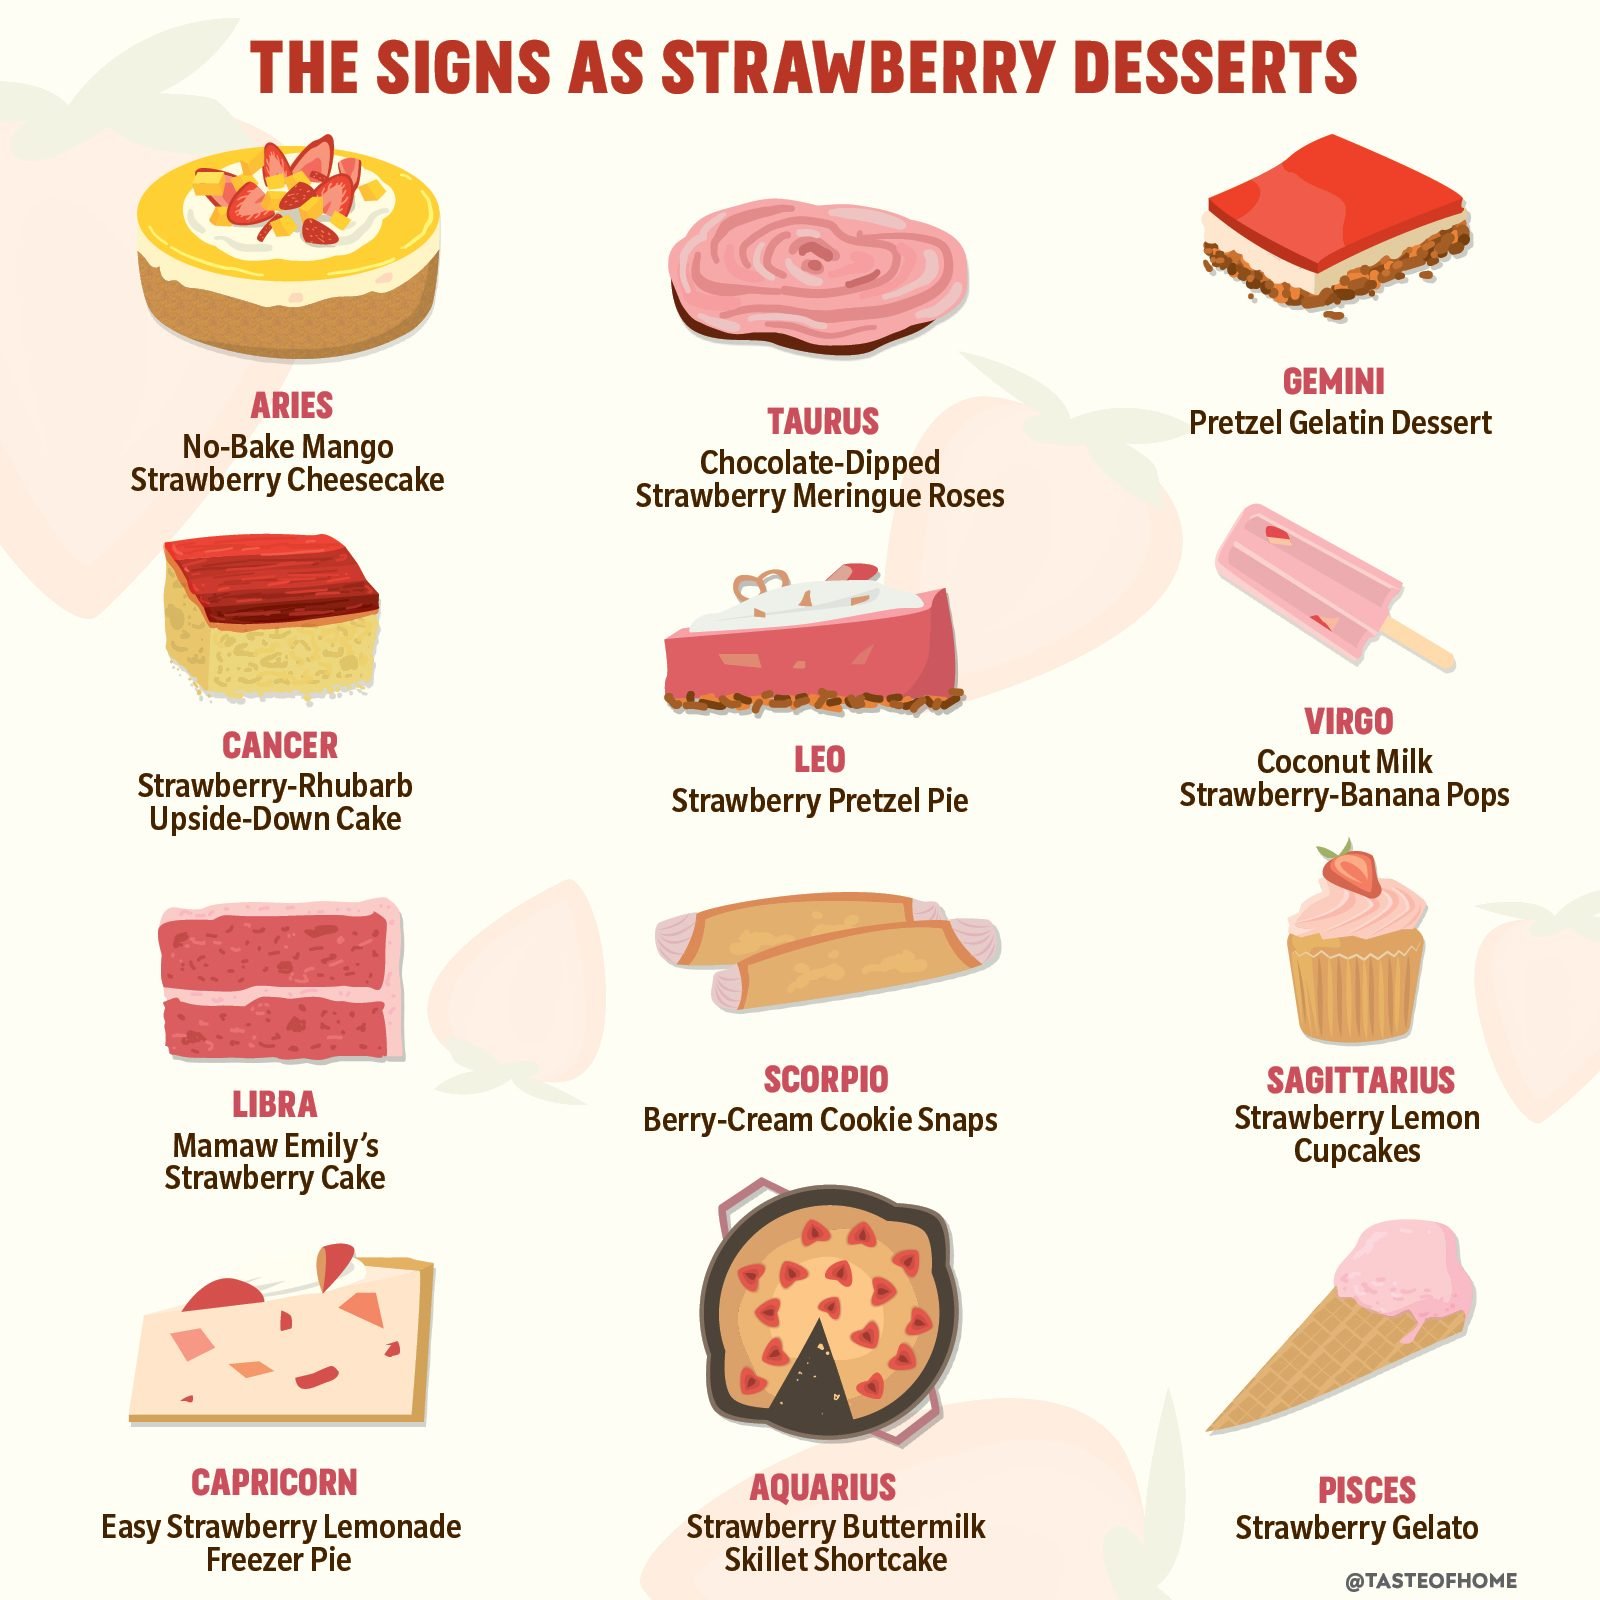 The Best Spring Strawberry Dessert For Your Zodiac Sign